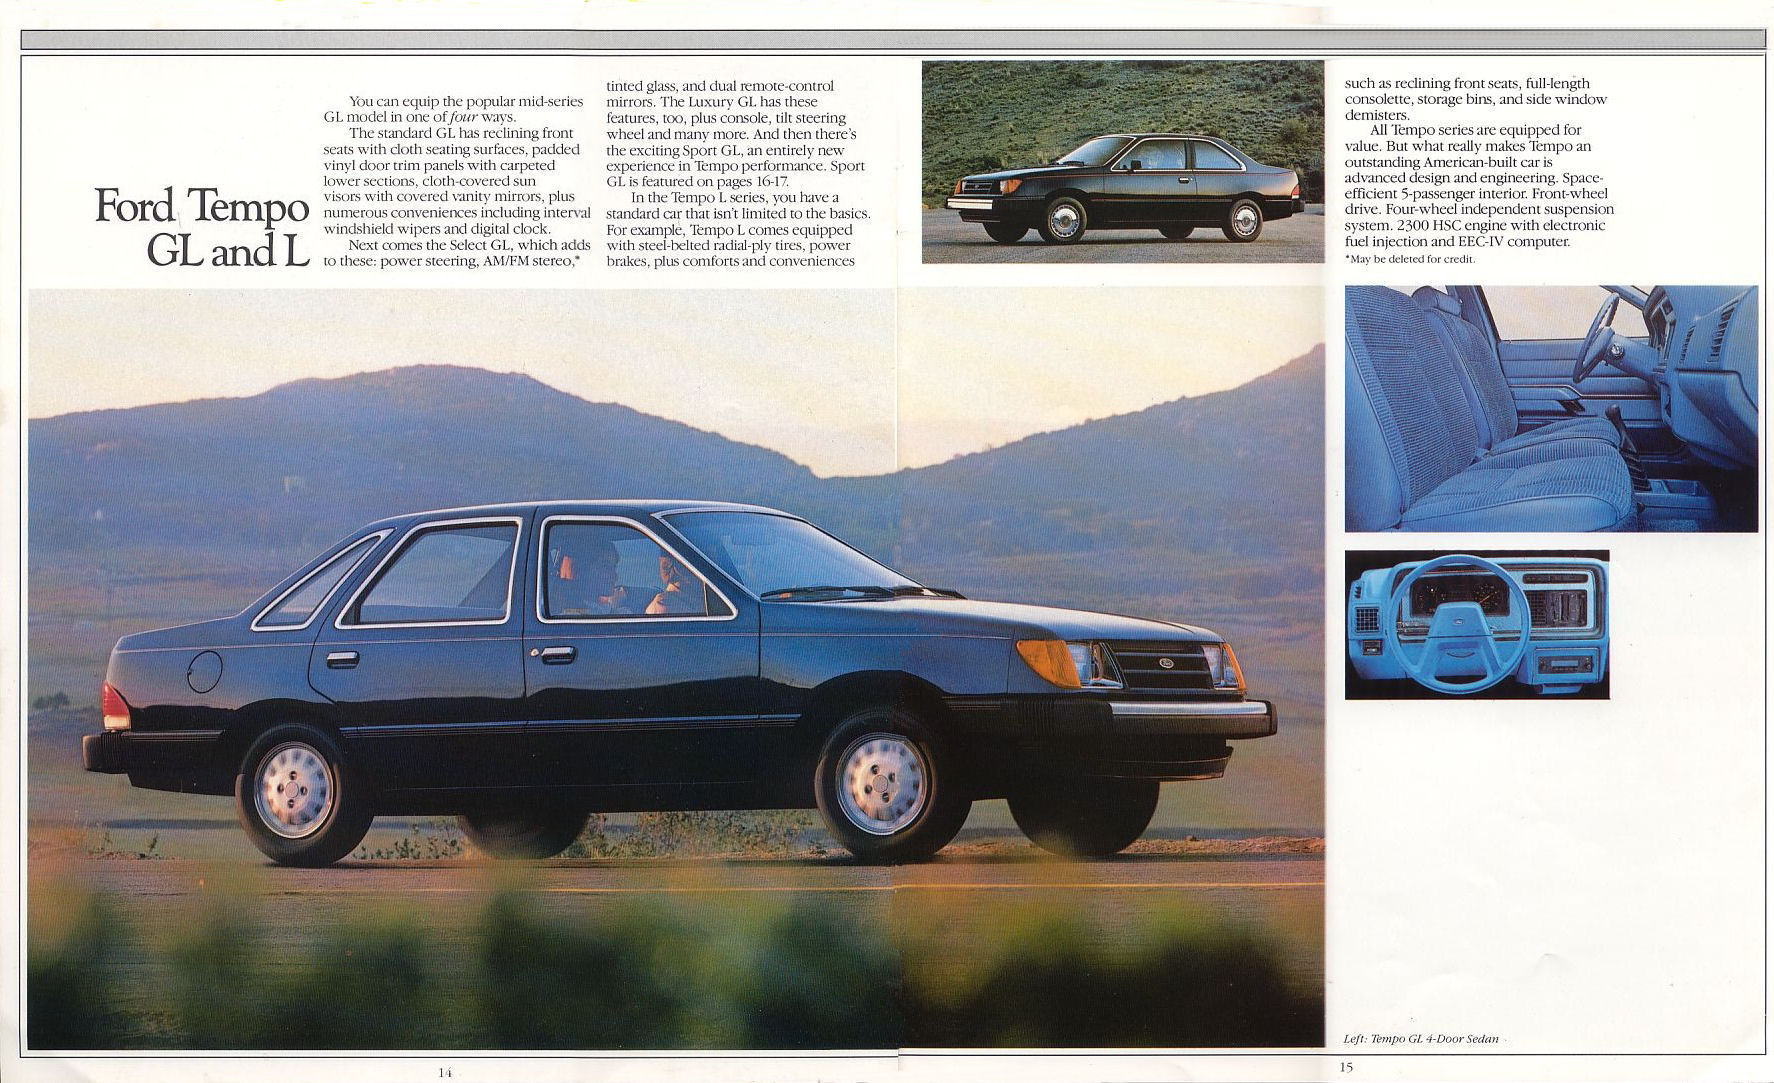 1985 Ford Tempo Brochure Page 13